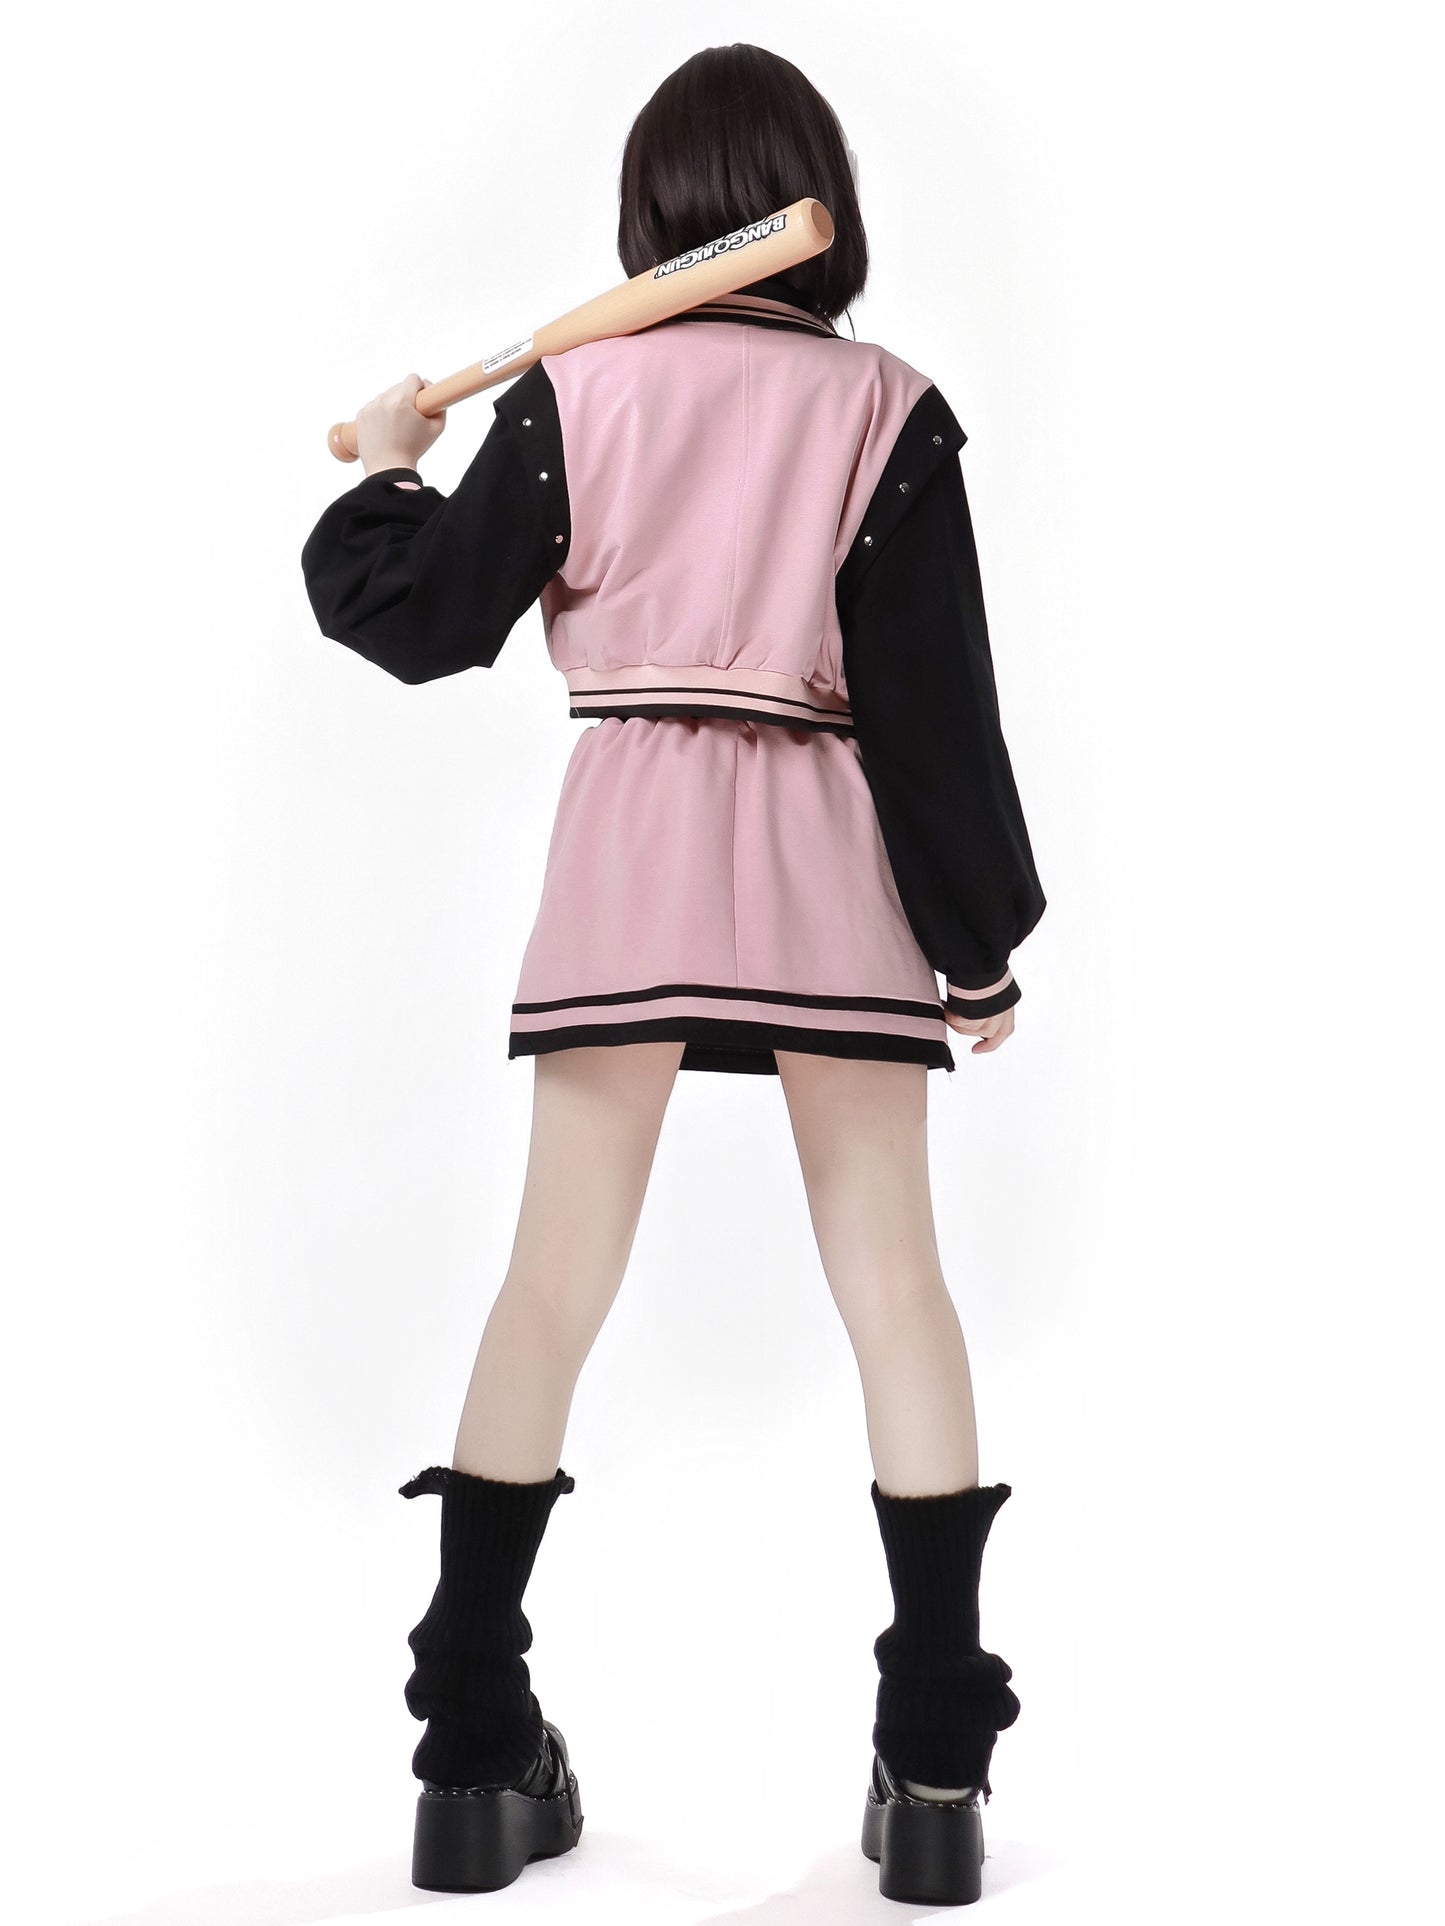 Pinksavior [Starry Light Year] high-quality pink college baseball jersey jacket and skirt underneath